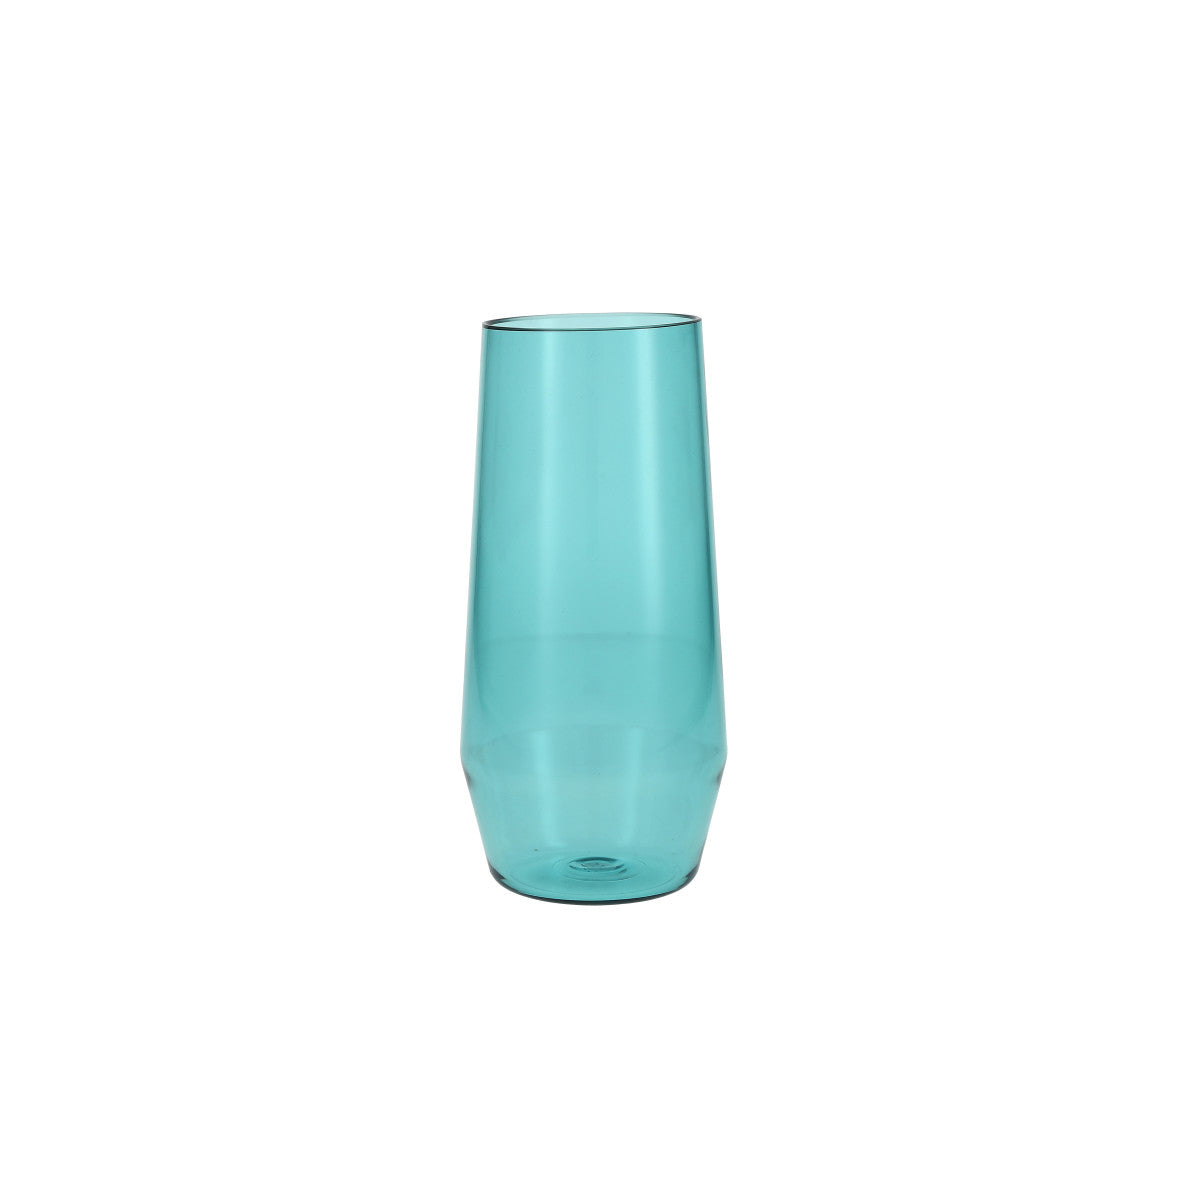 tall narrow blue drinking glass on whtie background.